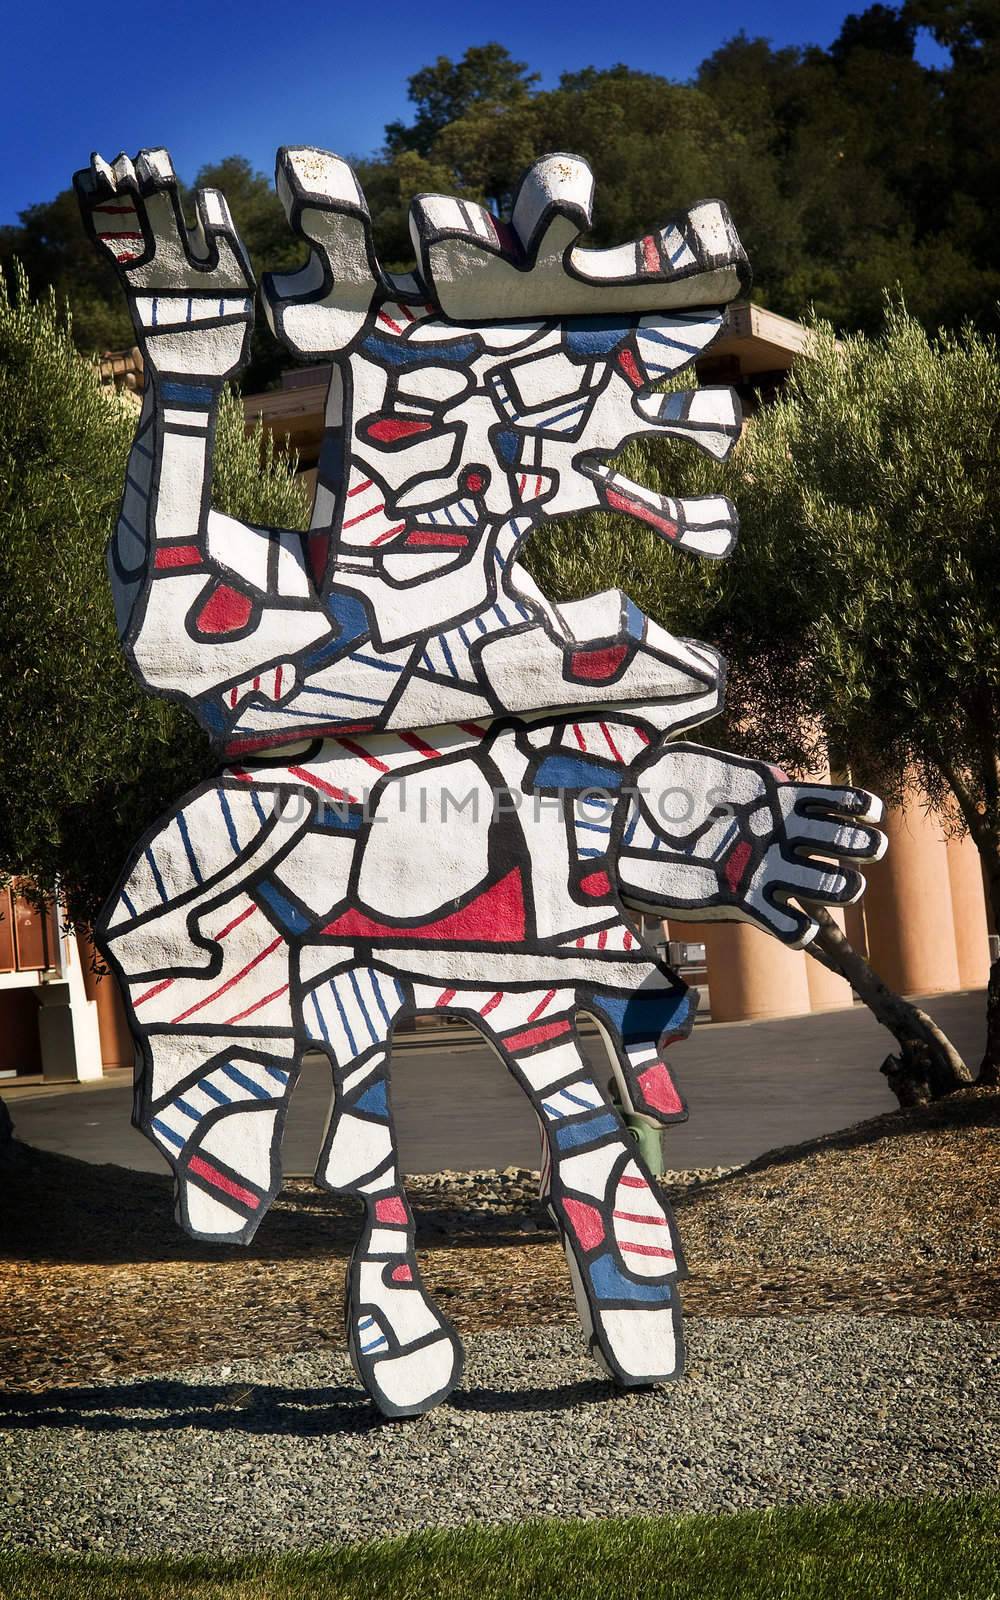 Jean Dubuffet sculpture in front of the Clos pegase Winery in Napa Valley